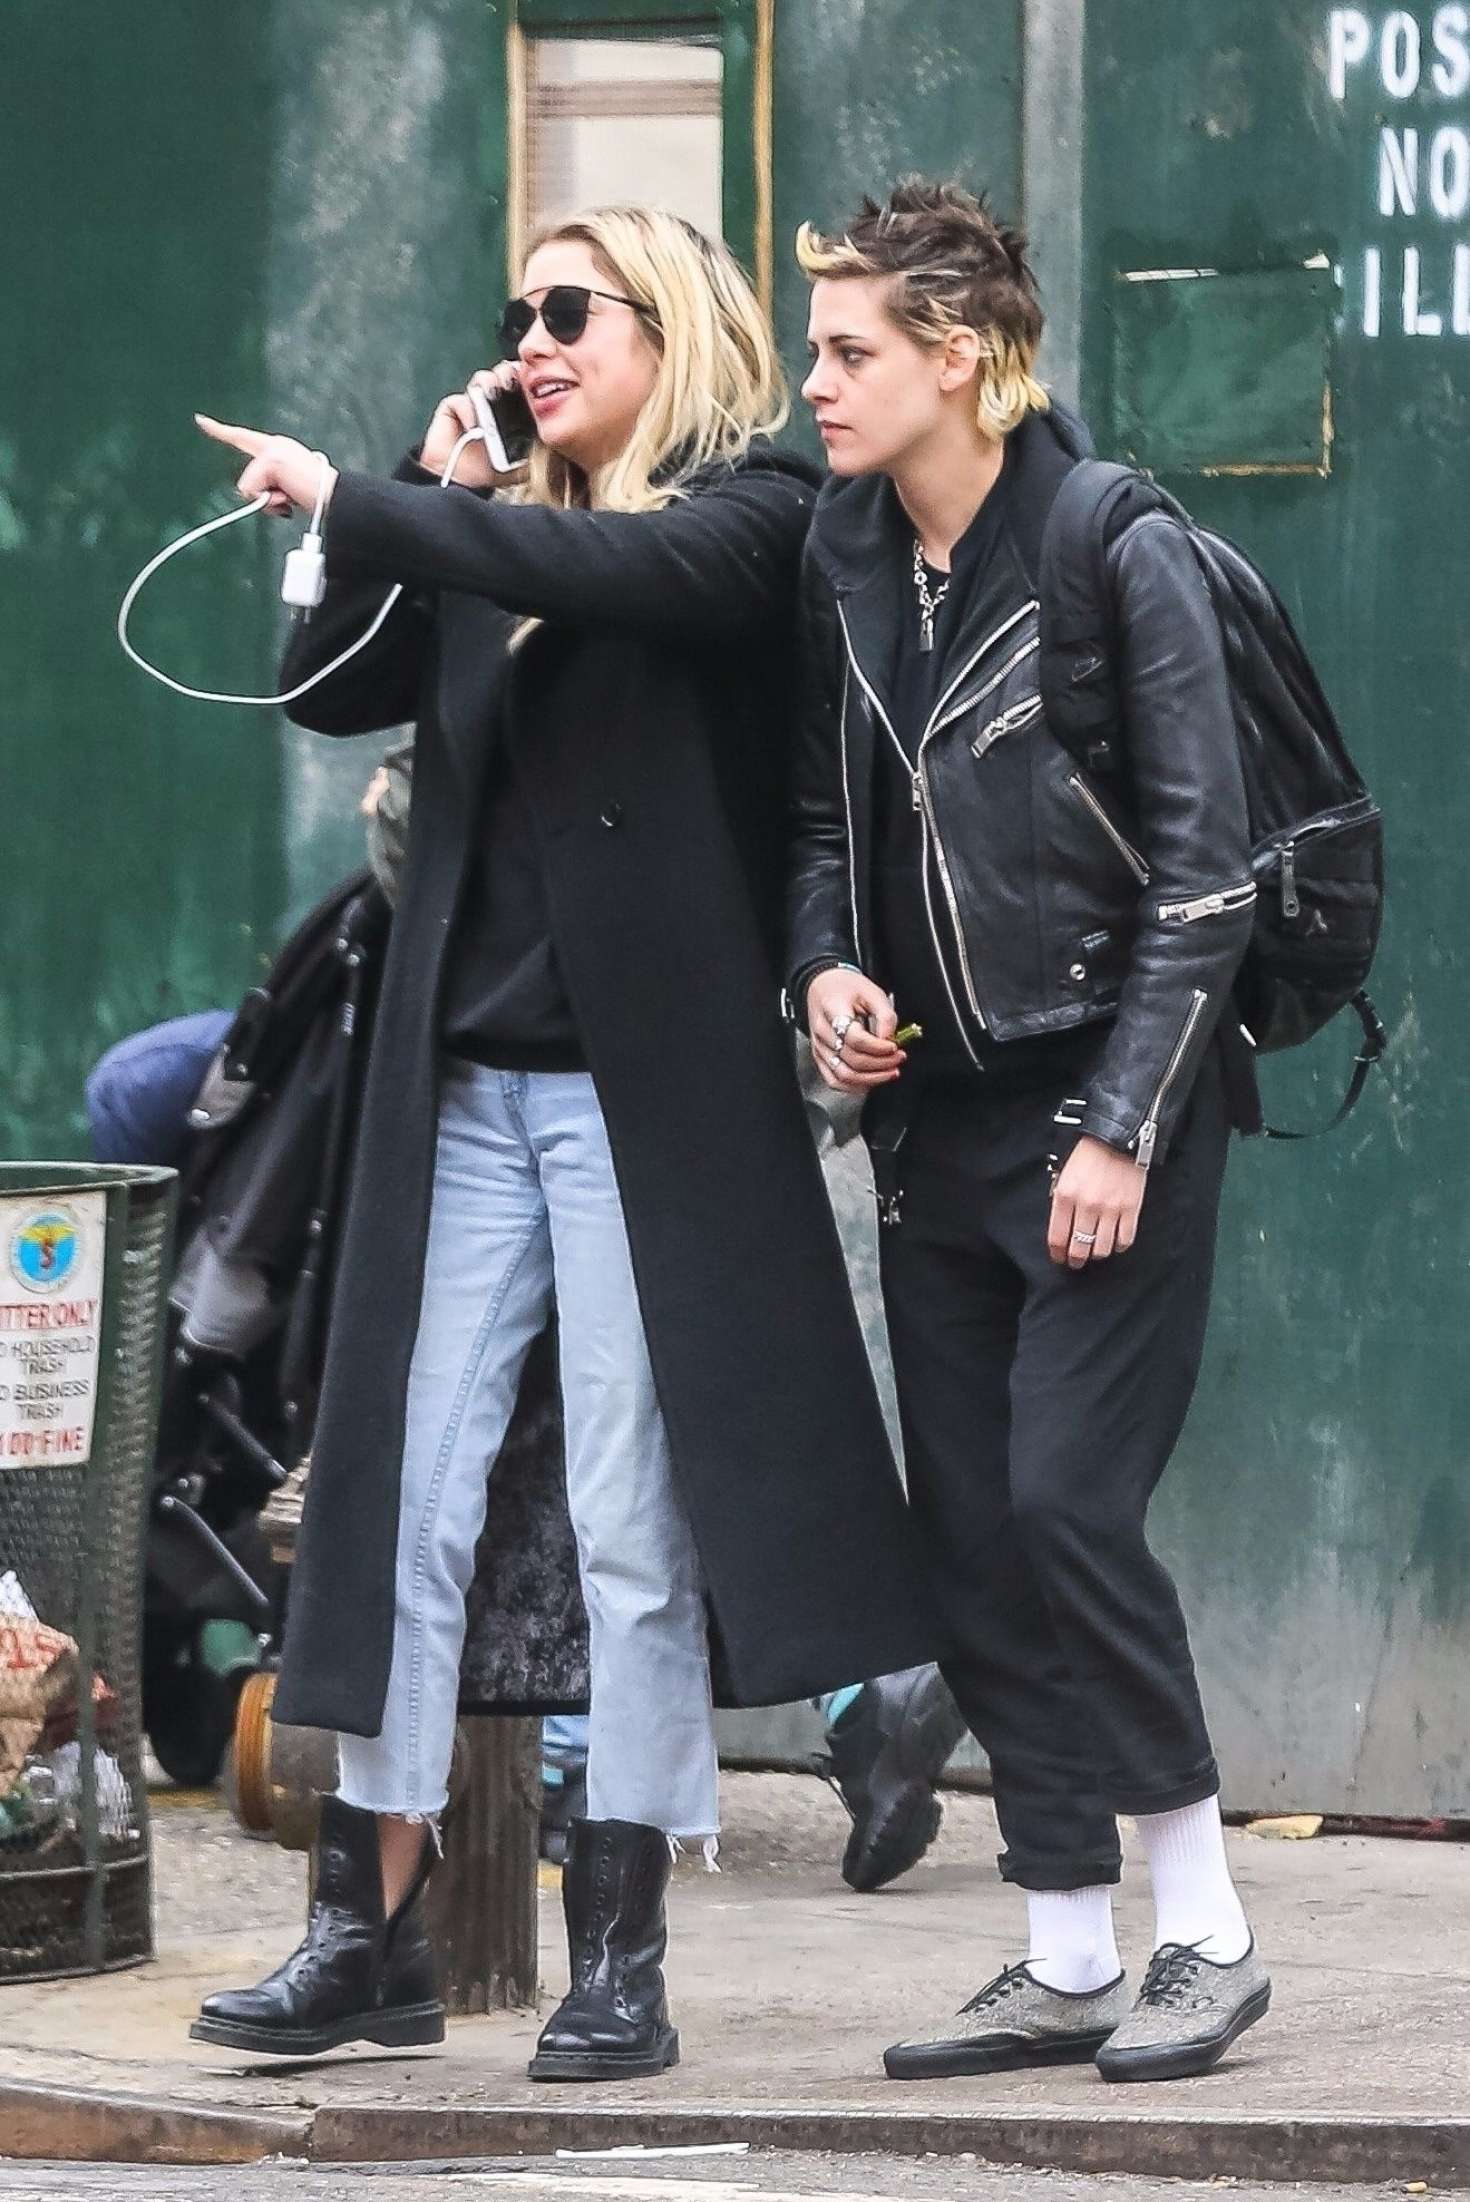 Ashley Benson and Kristen Stewart out together in NYC -31 | GotCeleb